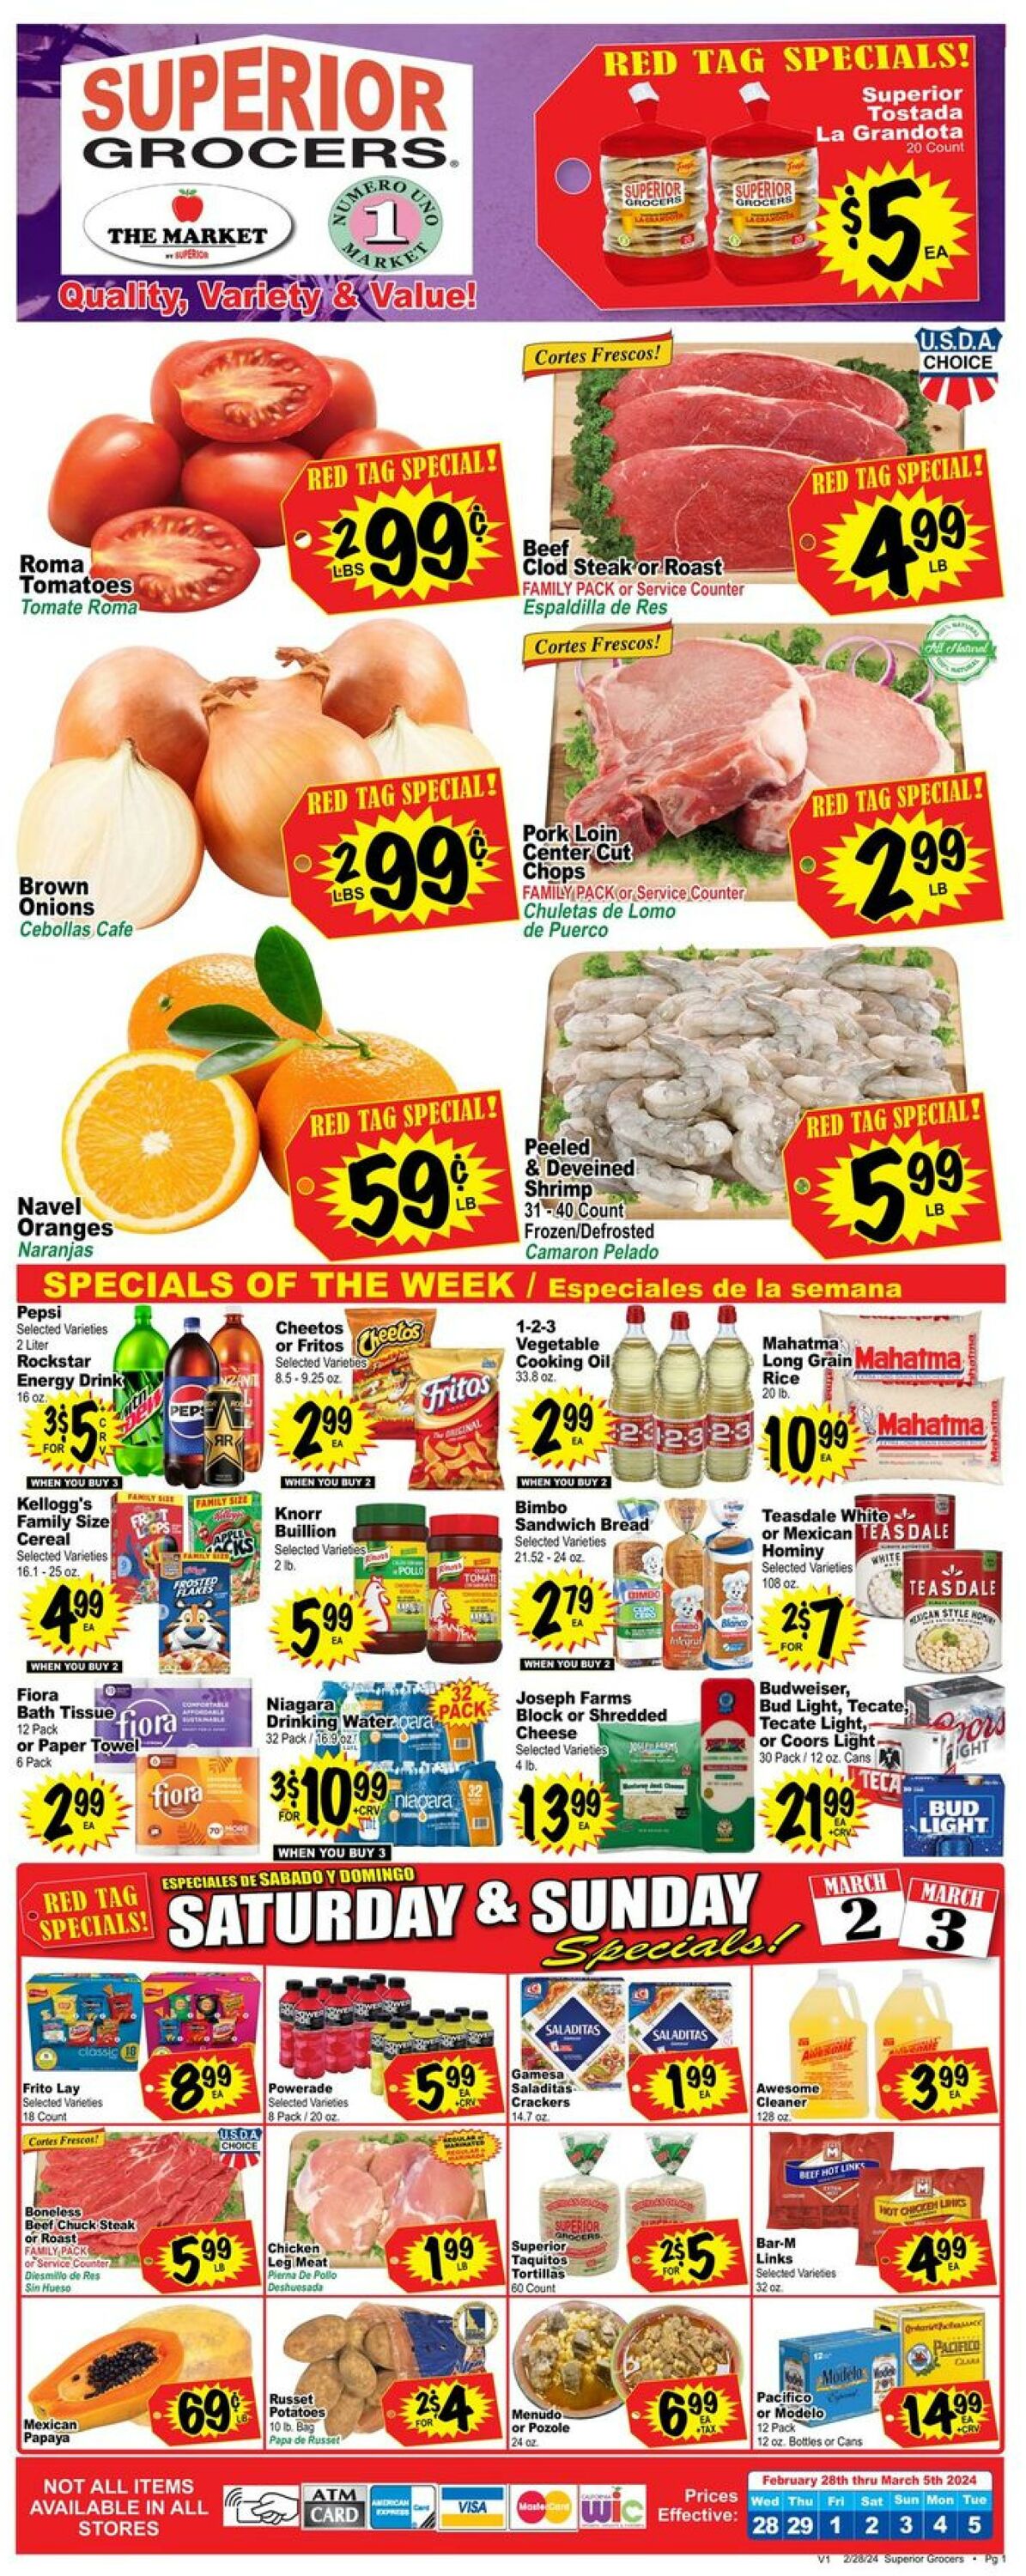 Superior Grocers Promotional weekly ads